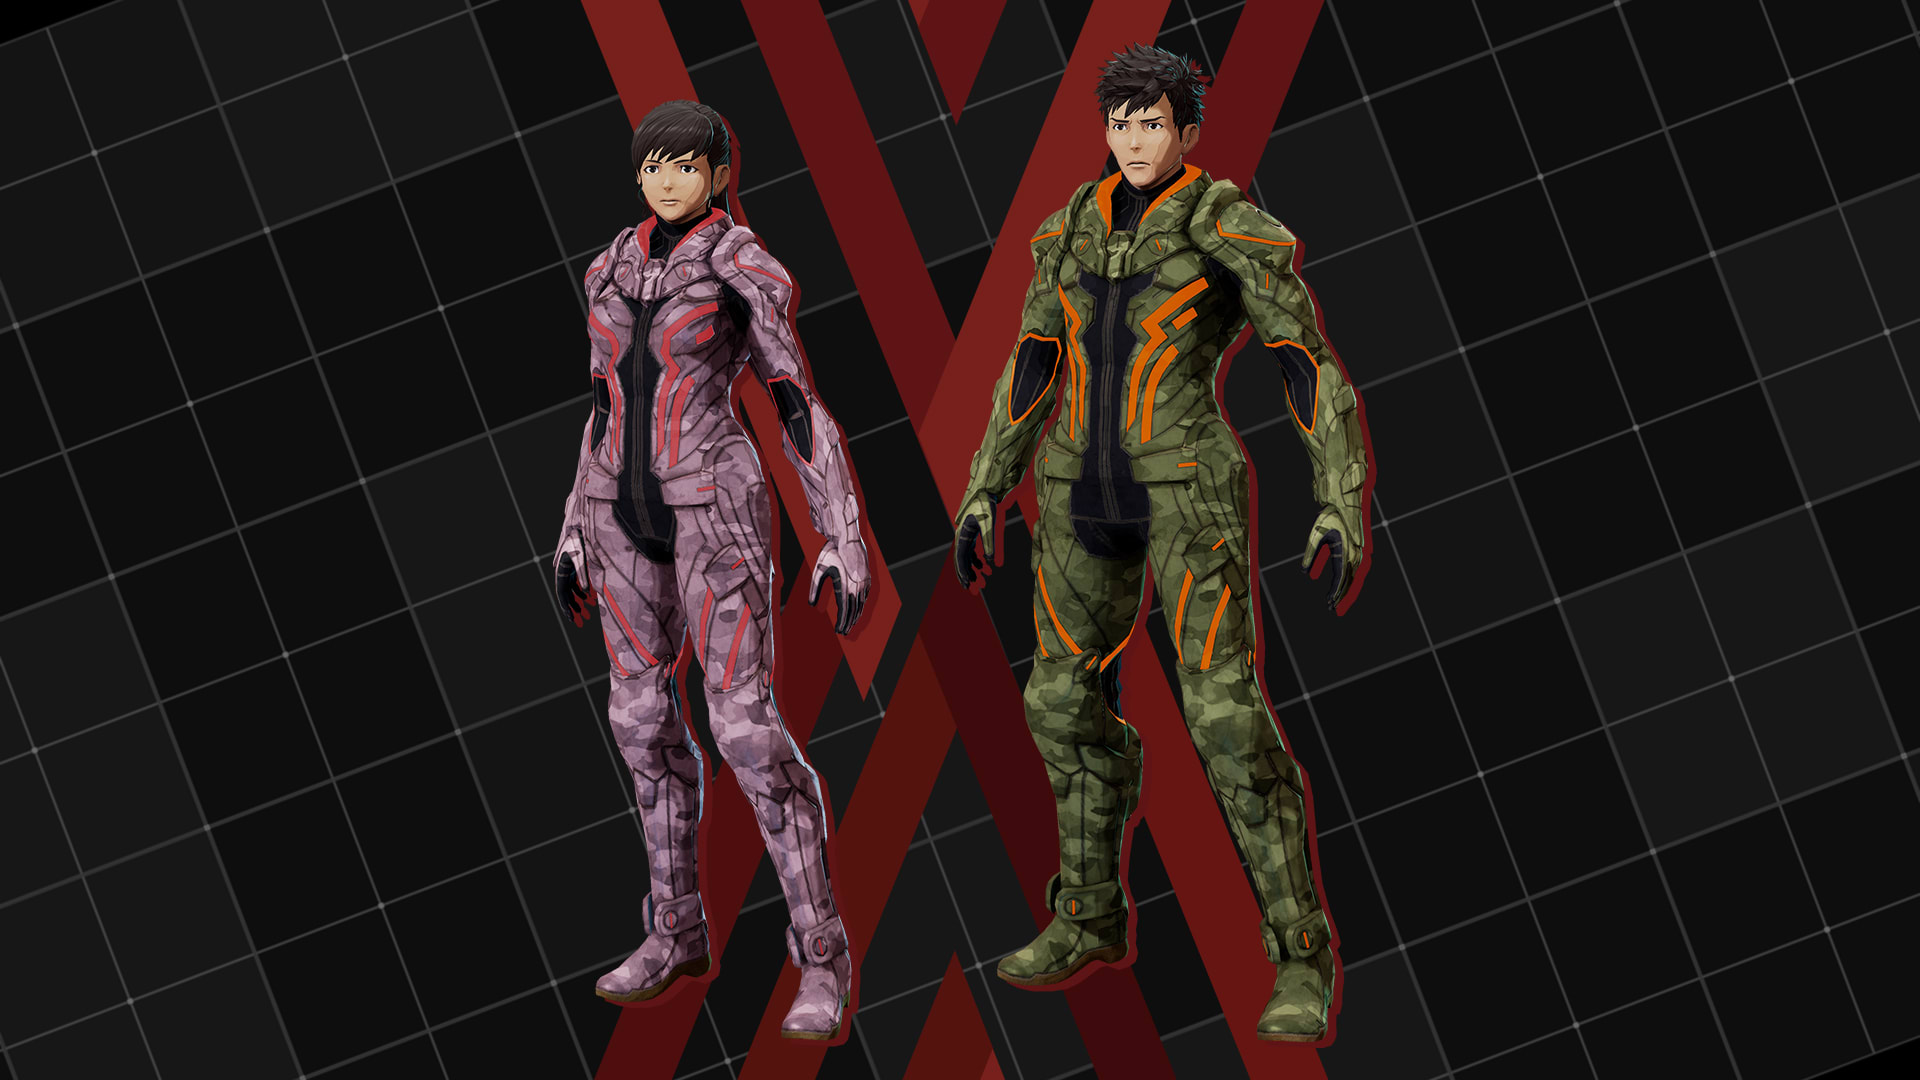 Outer Suit "Camouflage Plugsuit"